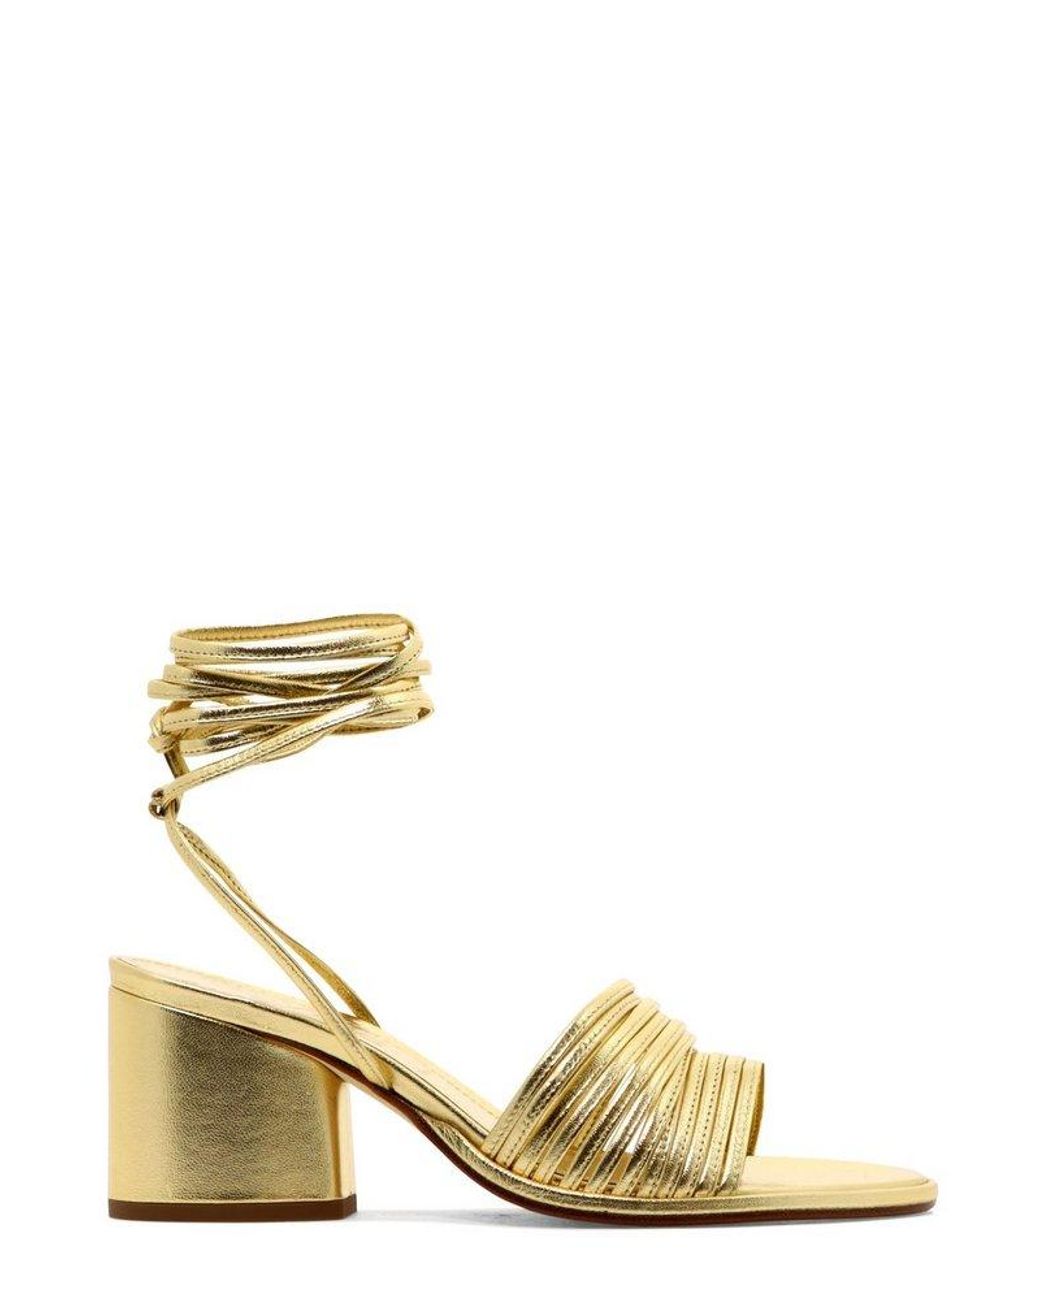 Aeyde Natania Strappy Sandals in Metallic | Lyst